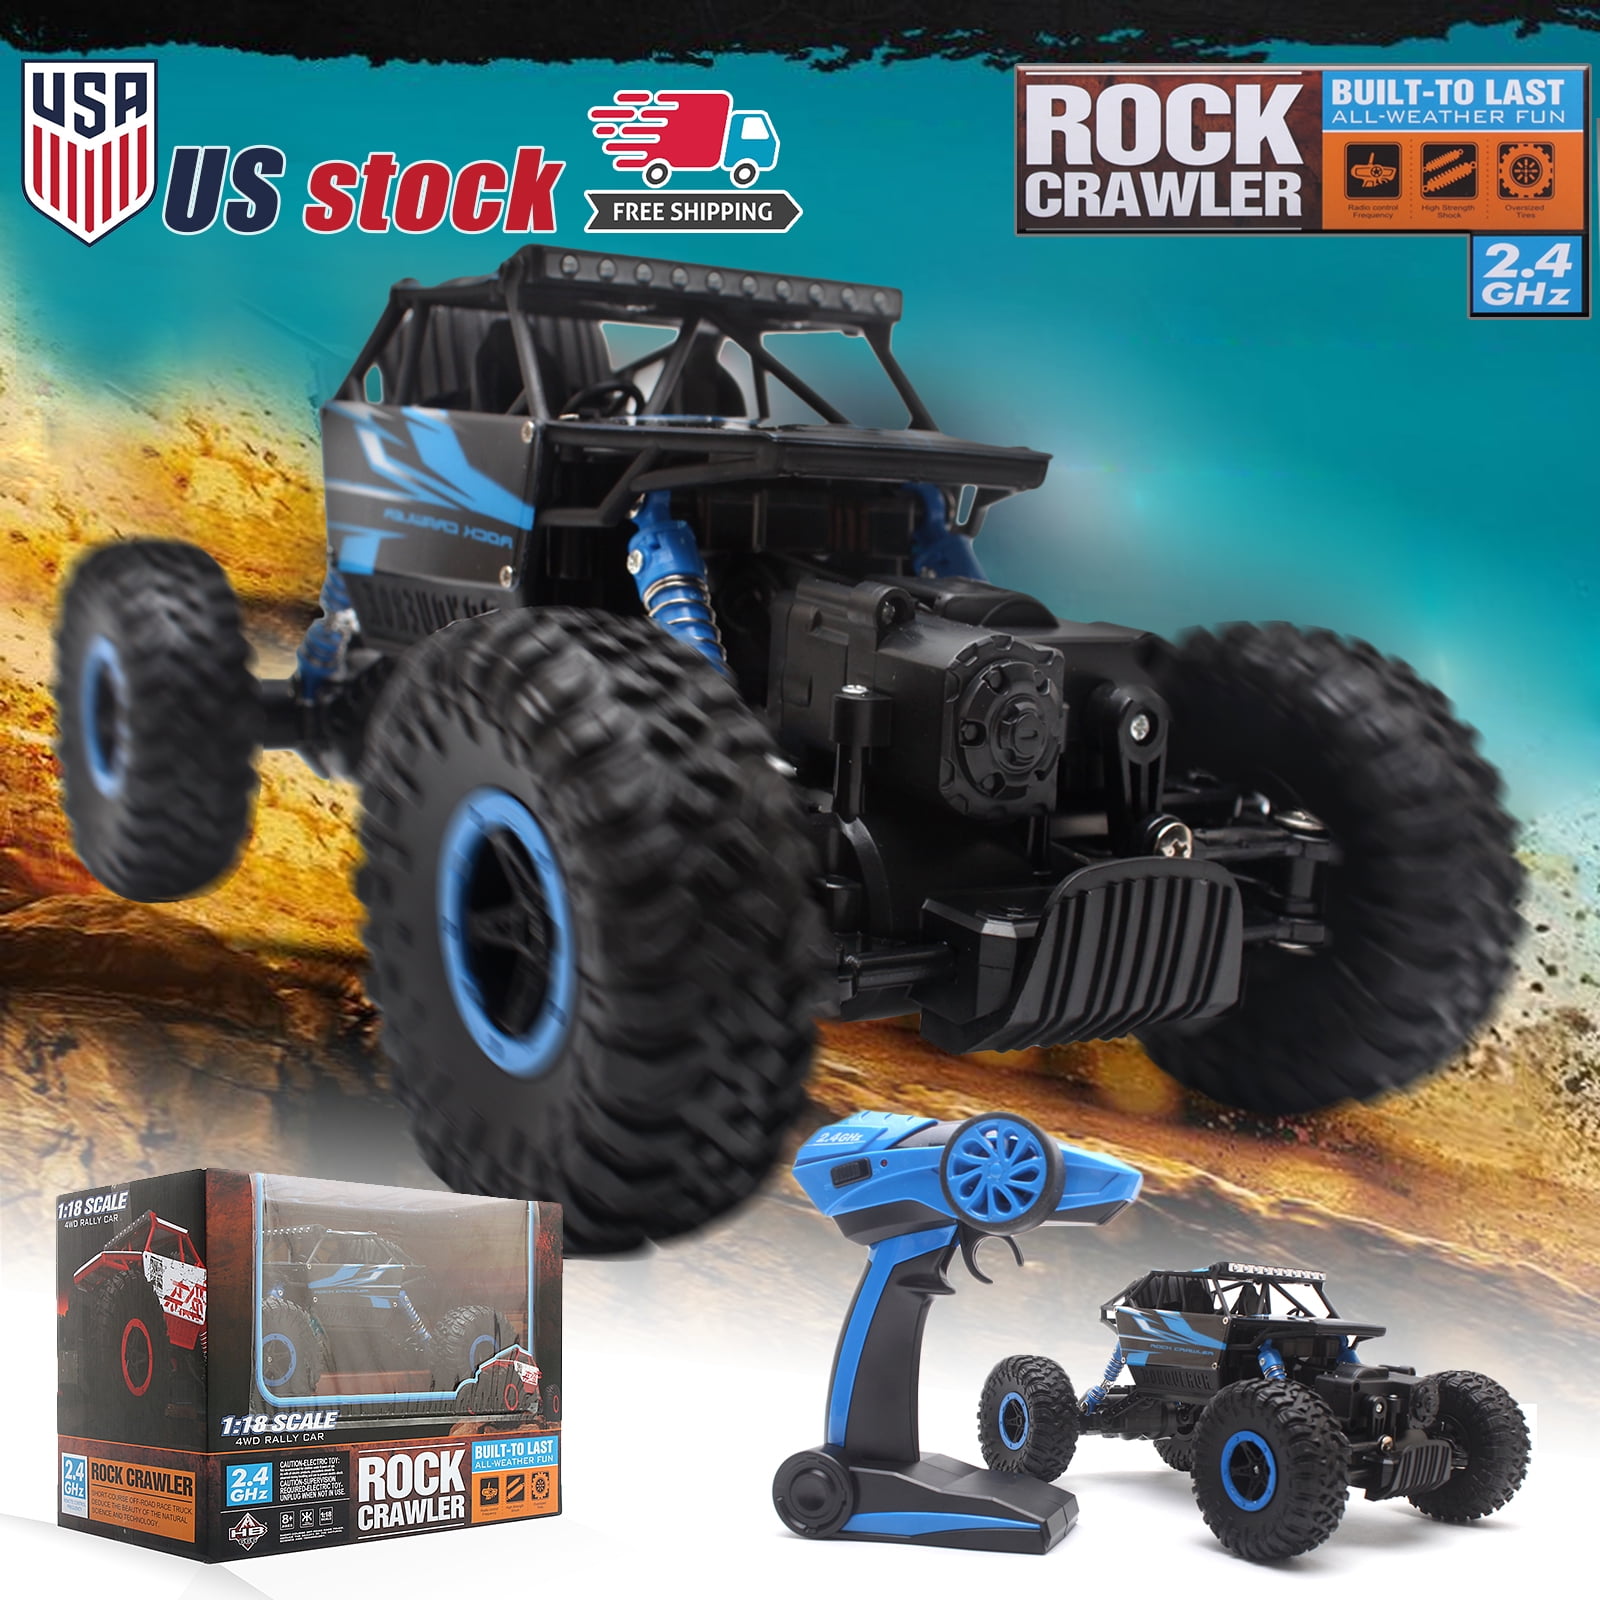 HB-P1801 2.4GHz 4WD 1/18 Scale 4x4 Rock Crawler Off-road Vehicle RC Car Truck 